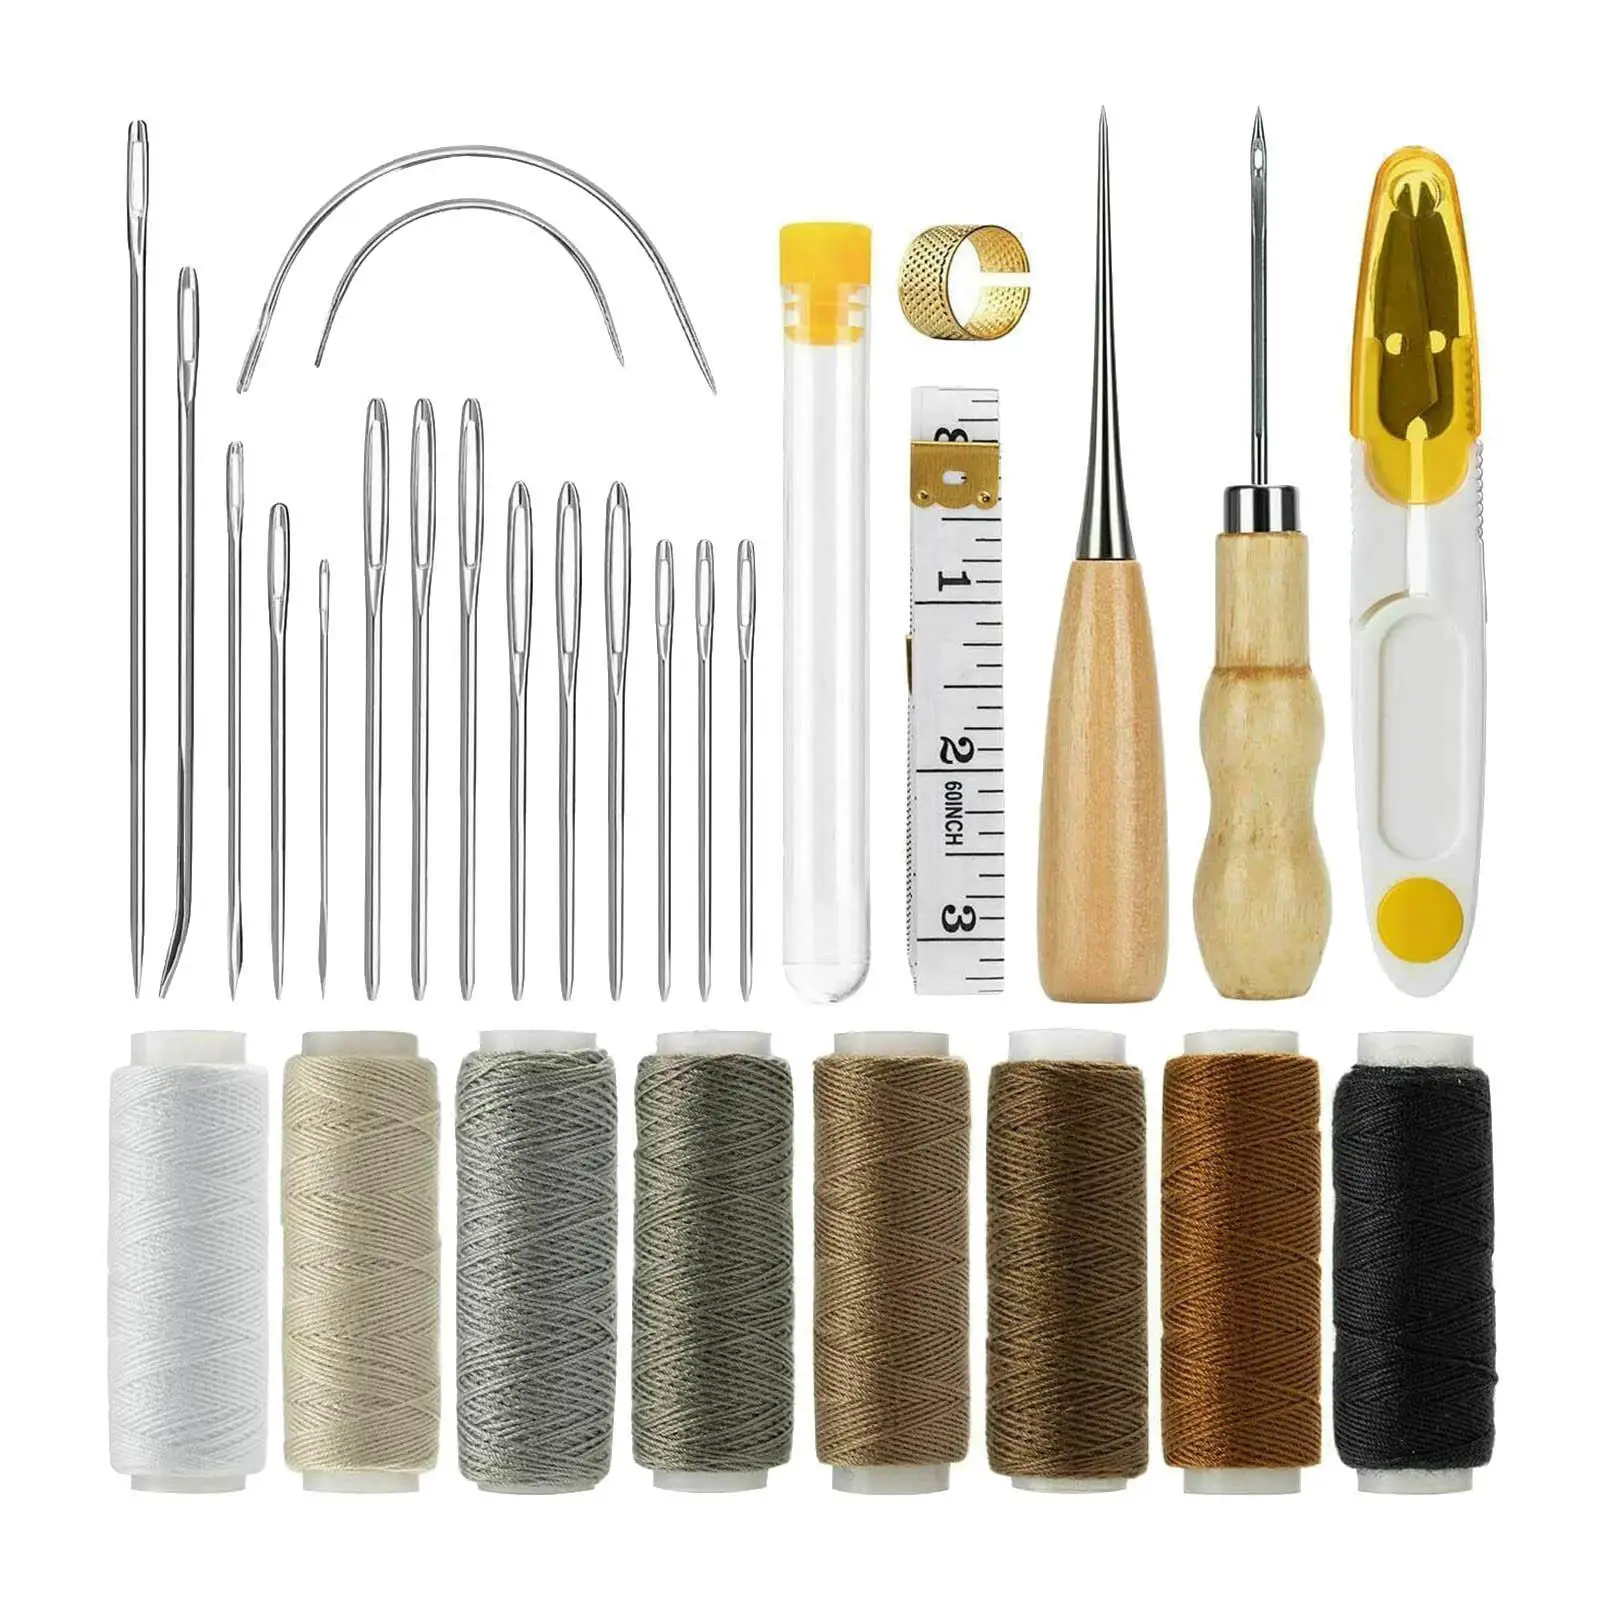 29Pcs Household Leather Craft Tools Kit Hand Sewing for Manual Lovers